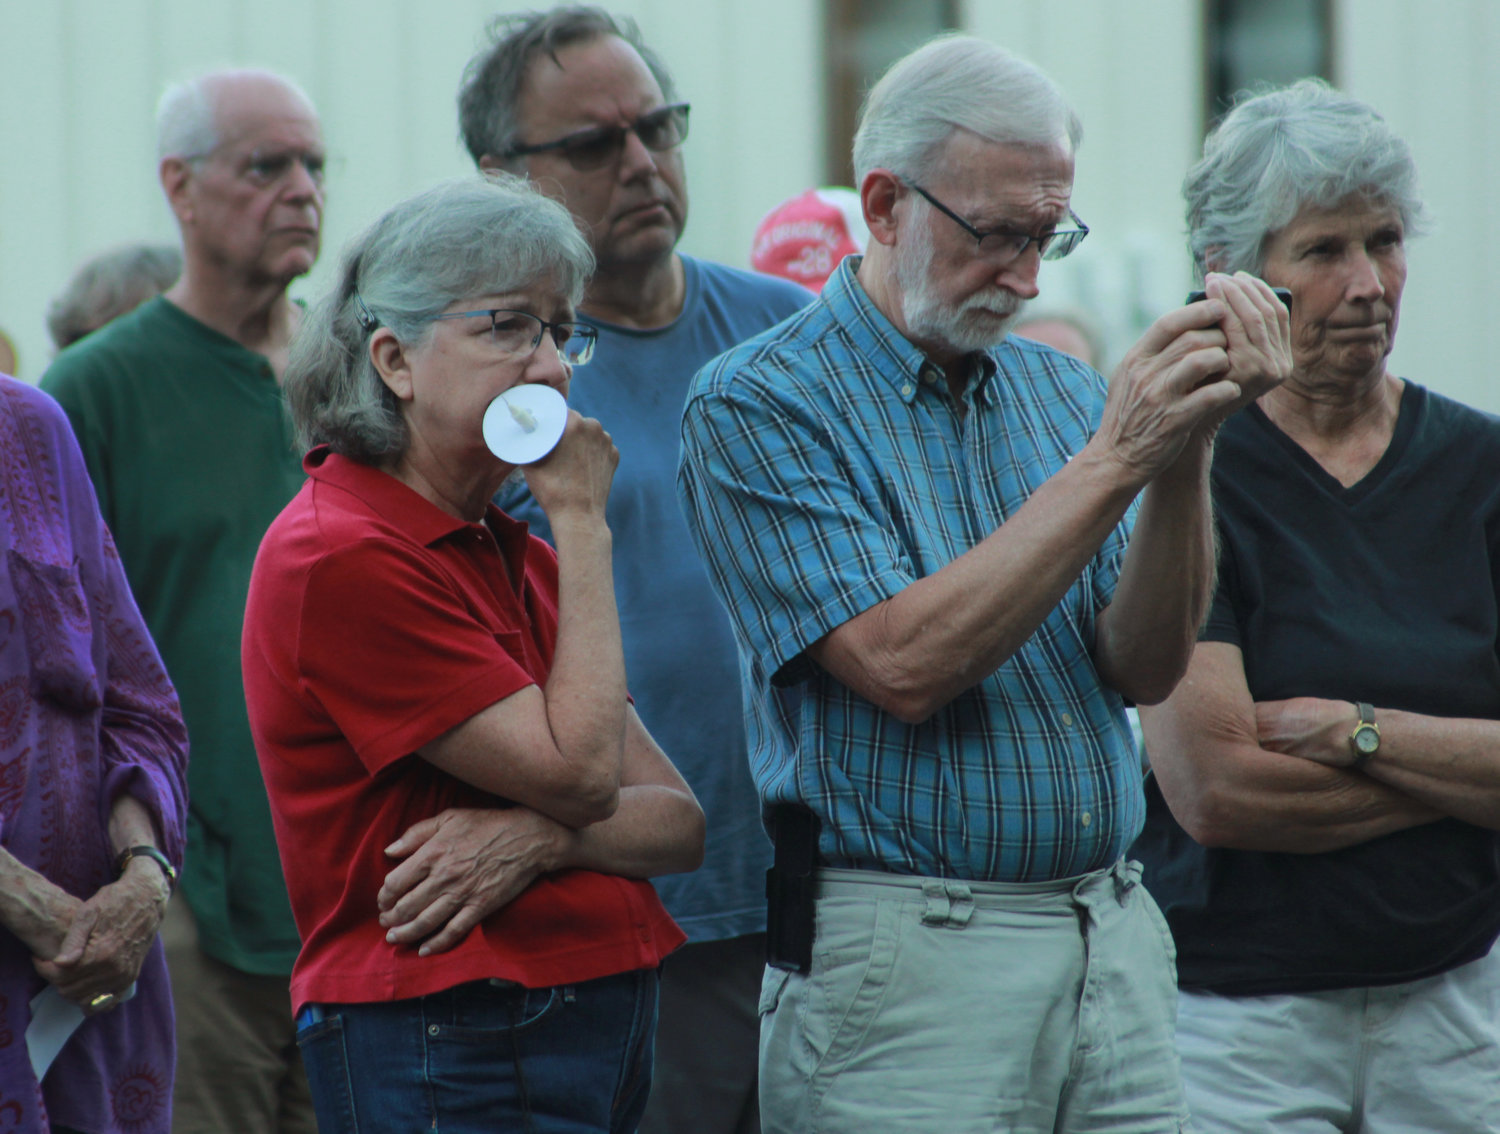 From left, Connie McAdams and Gary Simpson listen as Sheila Fleming sings “Calling All Angels” at the Chatham County vigil for recent mass shootings on Sunday, May 29 in Pittsboro.